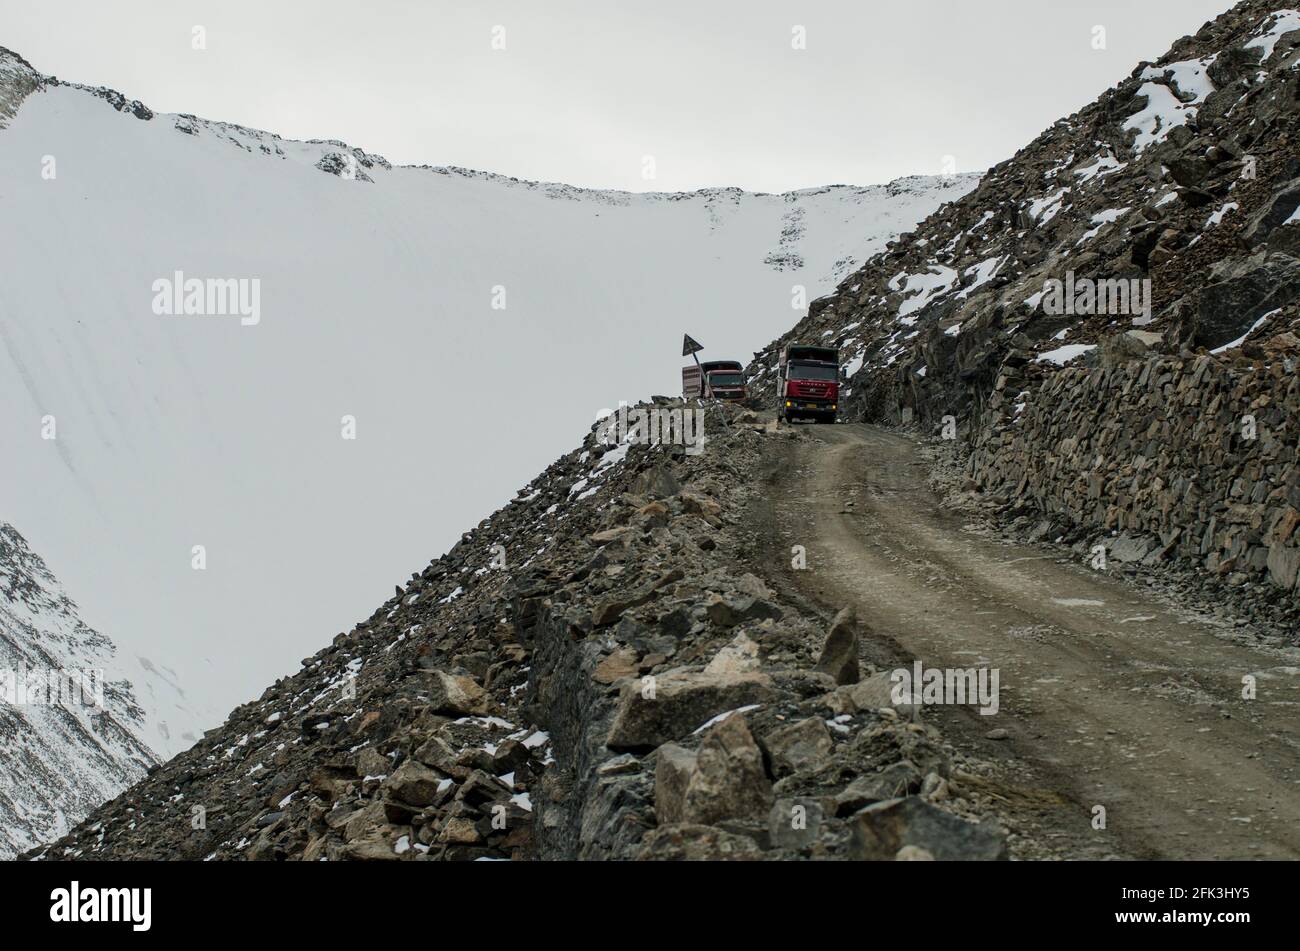 Heavy freight trucks and articulated lorries navigate along the unpaved G216 highway connecting Urumuqi to the Bayingolin Prefecture across the snow-covered Tianshan mountains in Xinjiang, China, PRC. © Time-Snaps Stock Photo